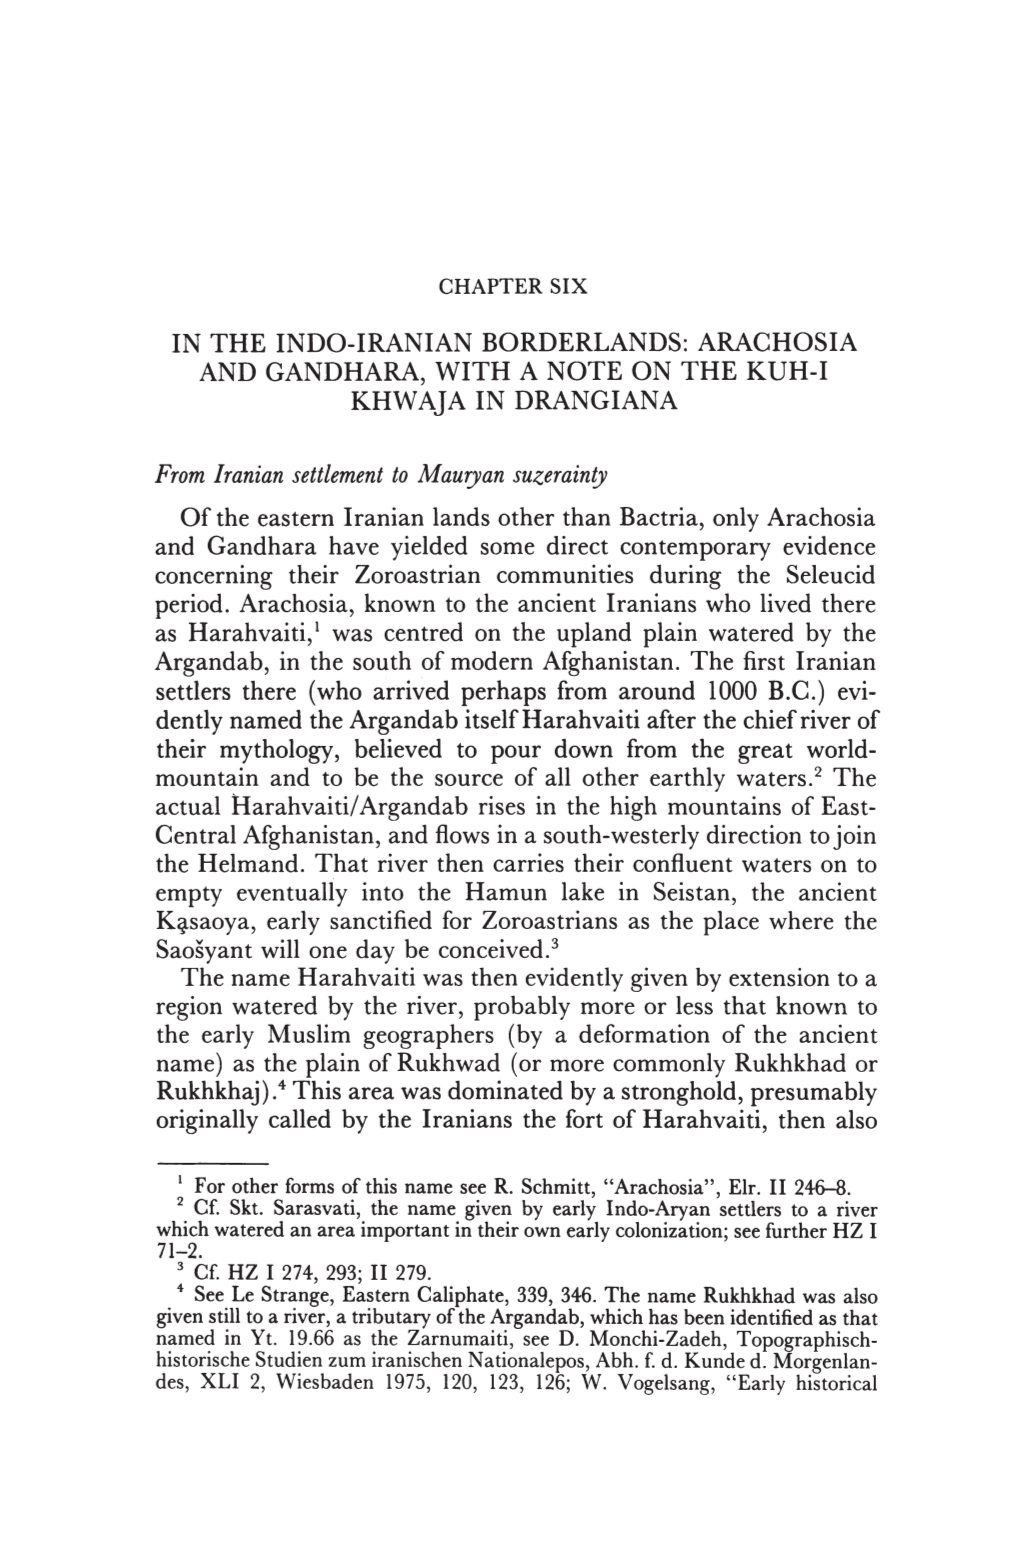 In the Indo-Iranian Borderlands: Arachosia and Gandhara, with a Note on the Kuh-I Khwaja in Drangiana